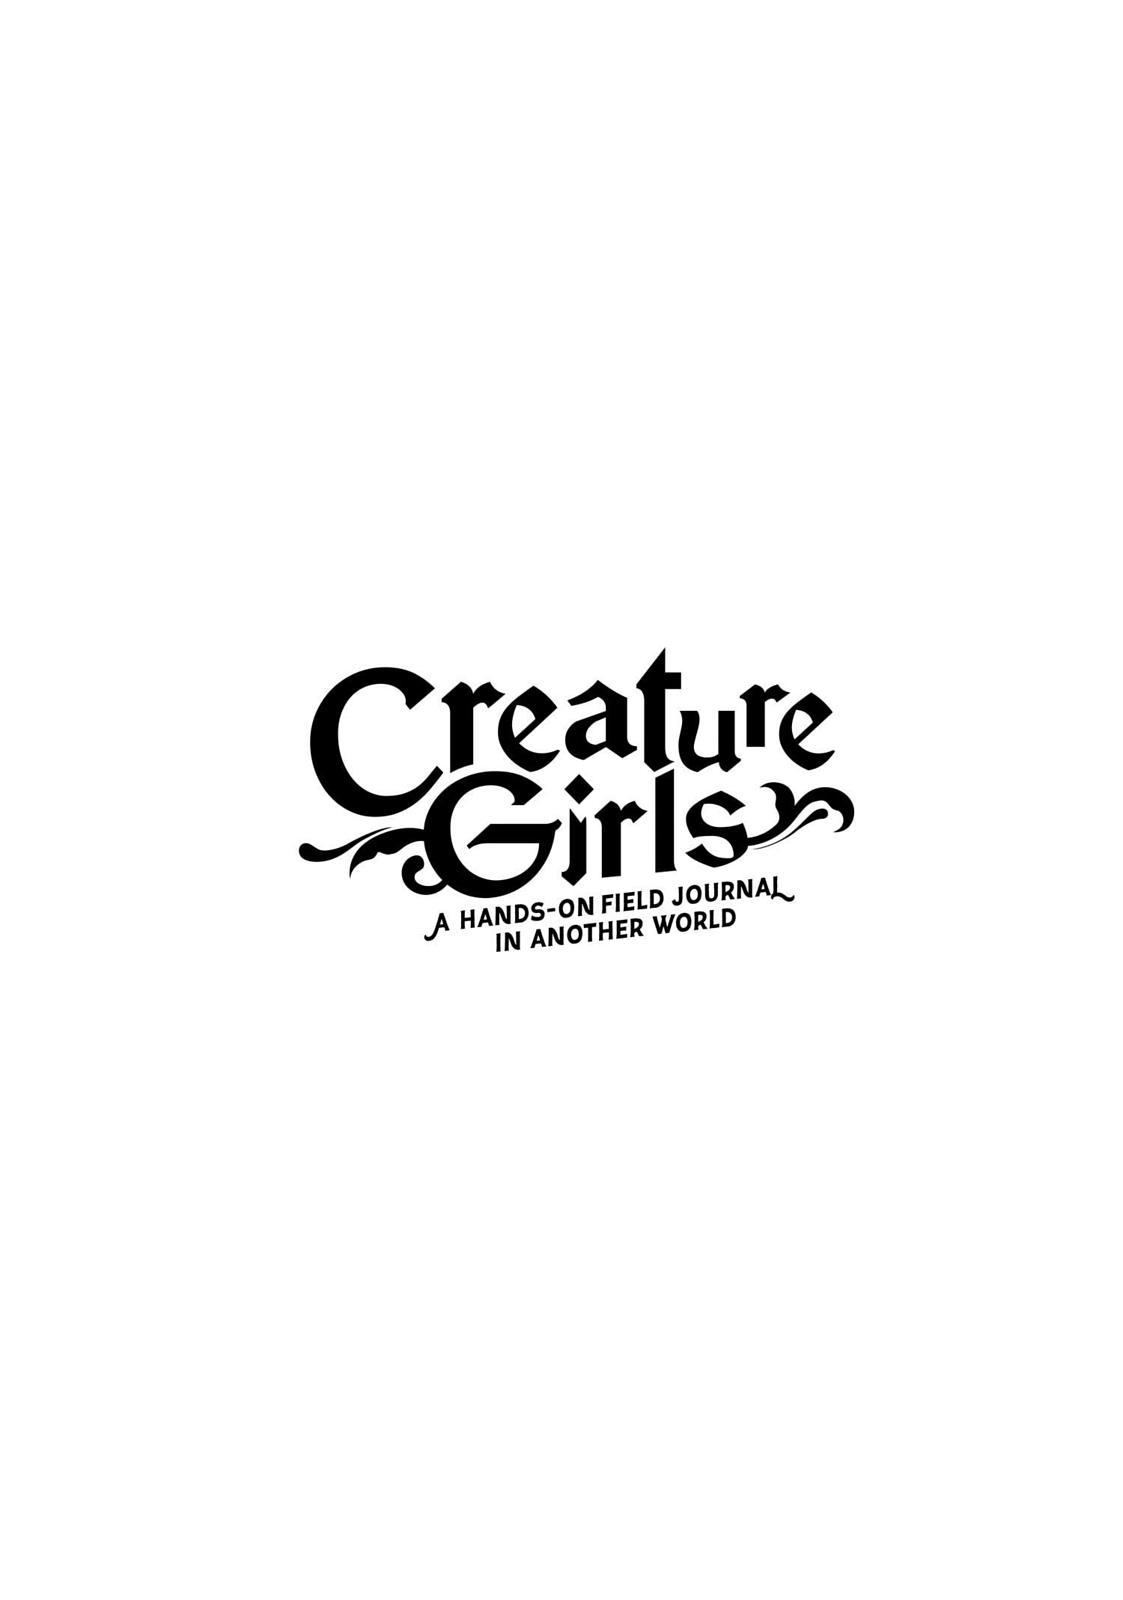 Creature Girls - A hands-on field journal in another world 32